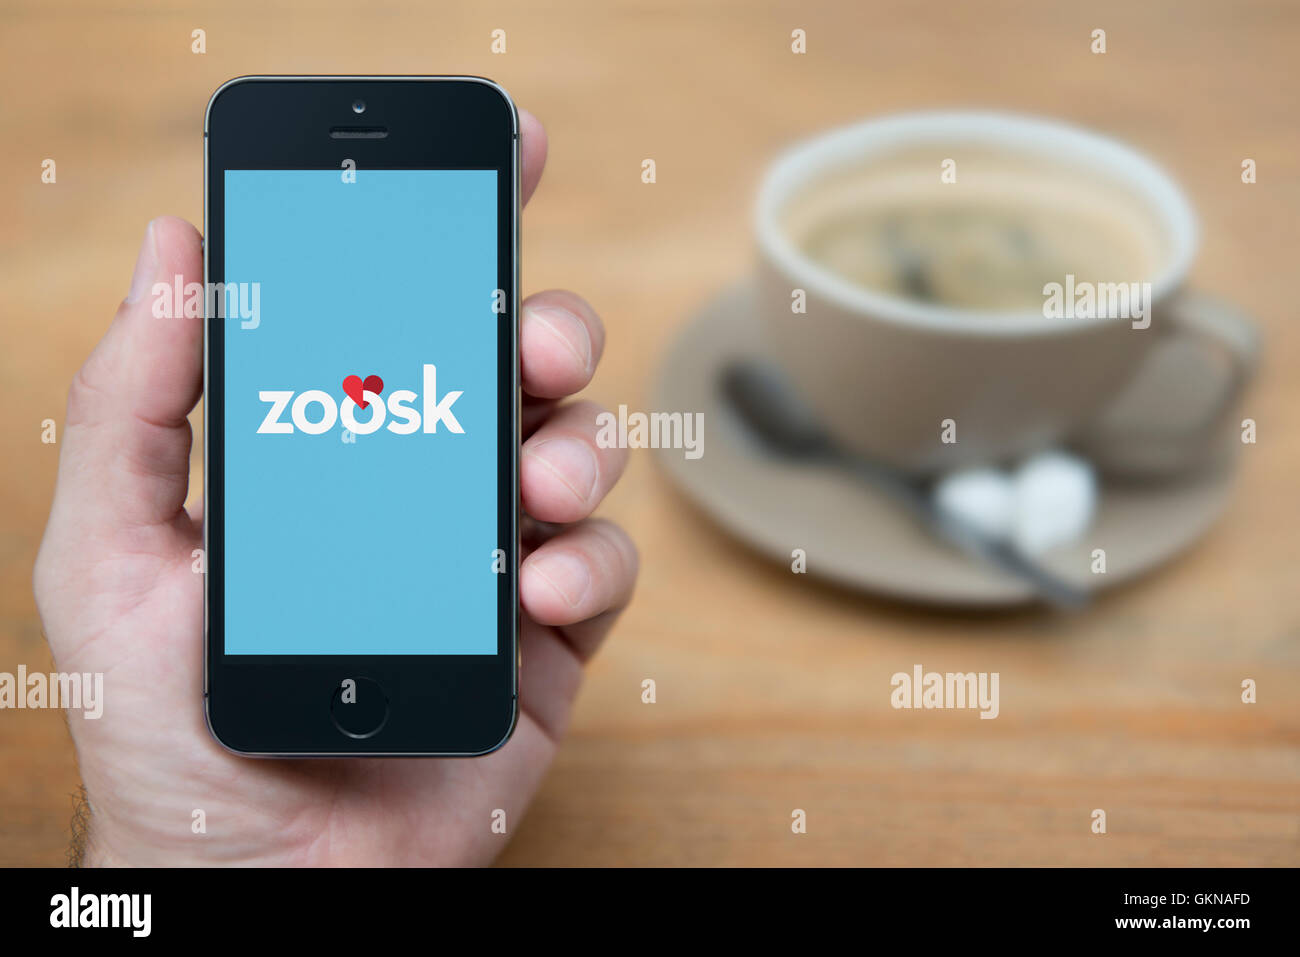 A man looks at his iPhone which displays the Zoosk logo, while sat with a cup of coffee (Editorial use only). Stock Photo